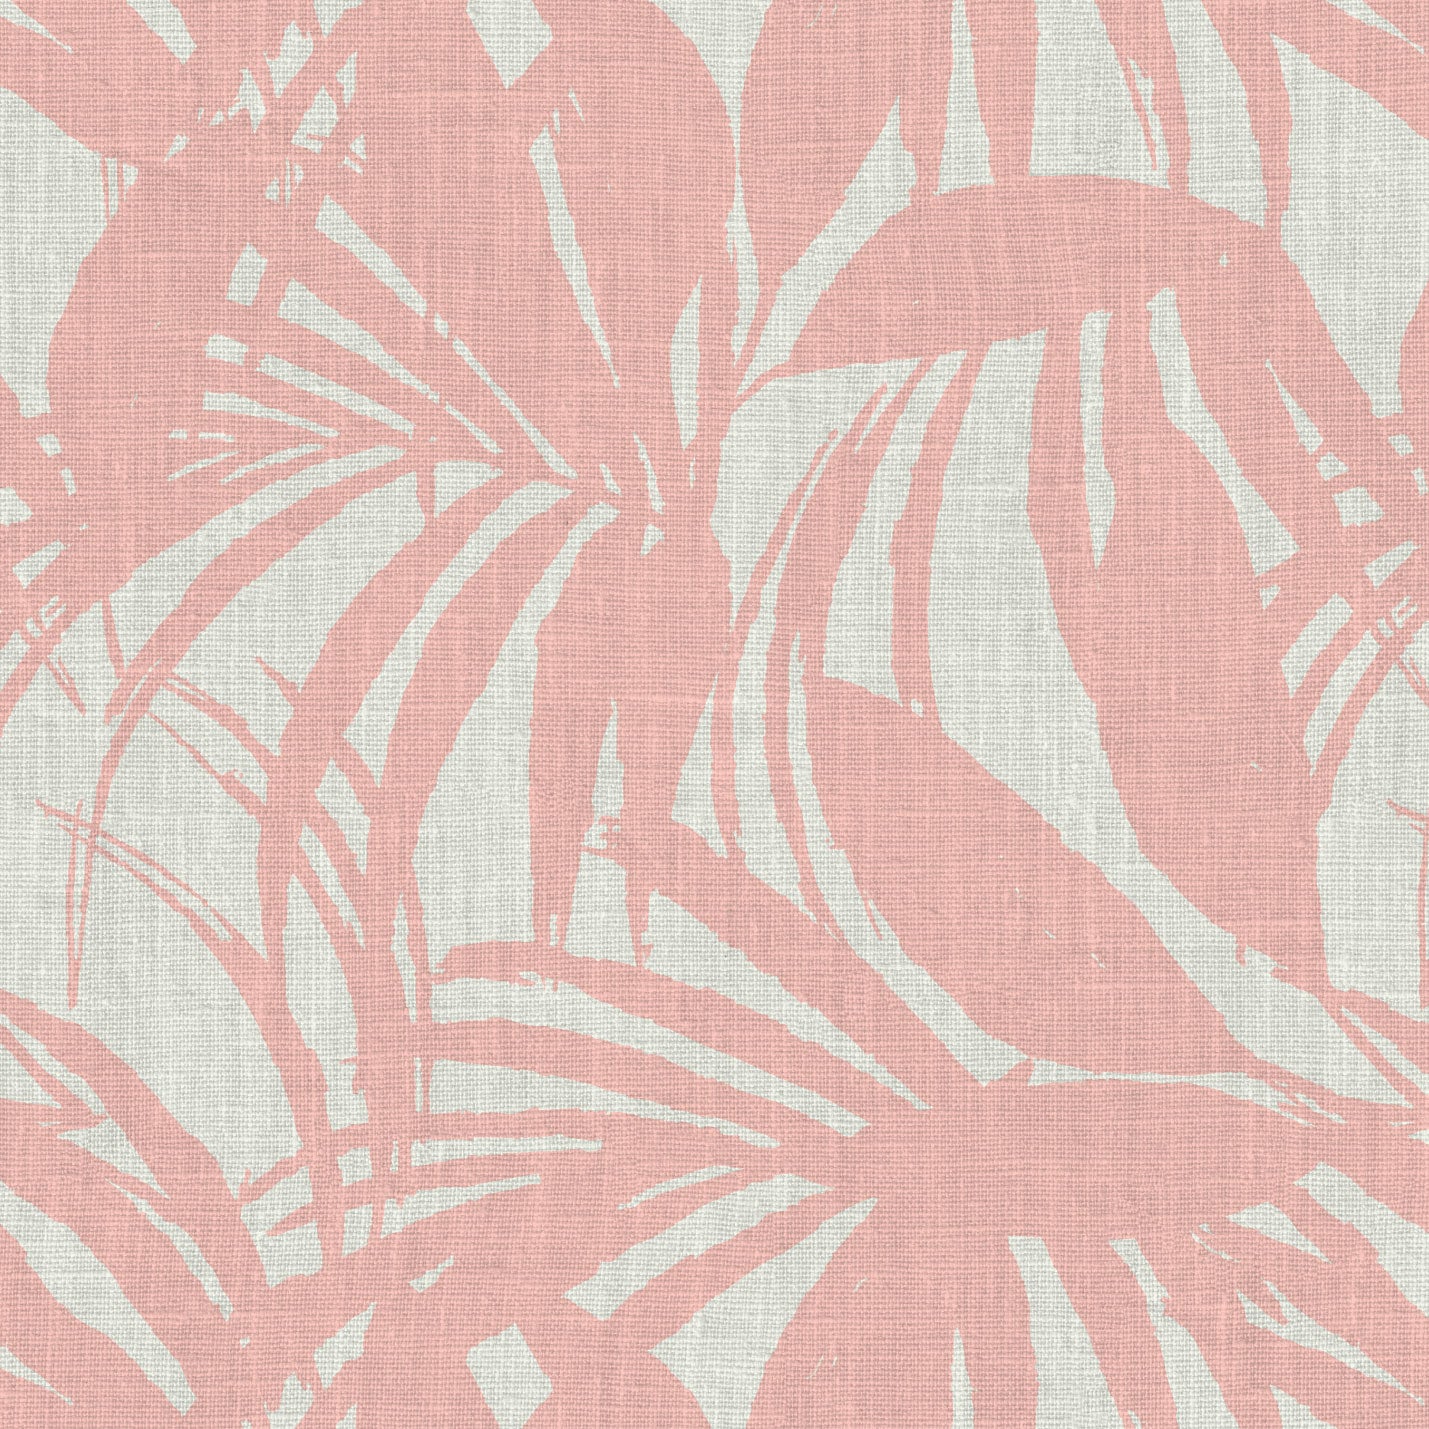 wallpaper oversize tropical leaf Natural Textured Eco-Friendly Non-toxic High-quality Sustainable practices Sustainability Interior Design Wall covering Bold retro chic custom jungle garden botanical Seaside Coastal Seashore Waterfront Vacation home styling Retreat Relaxed beach vibes Beach cottage Shoreline Oceanfront white baby pastel soft pink and white linen